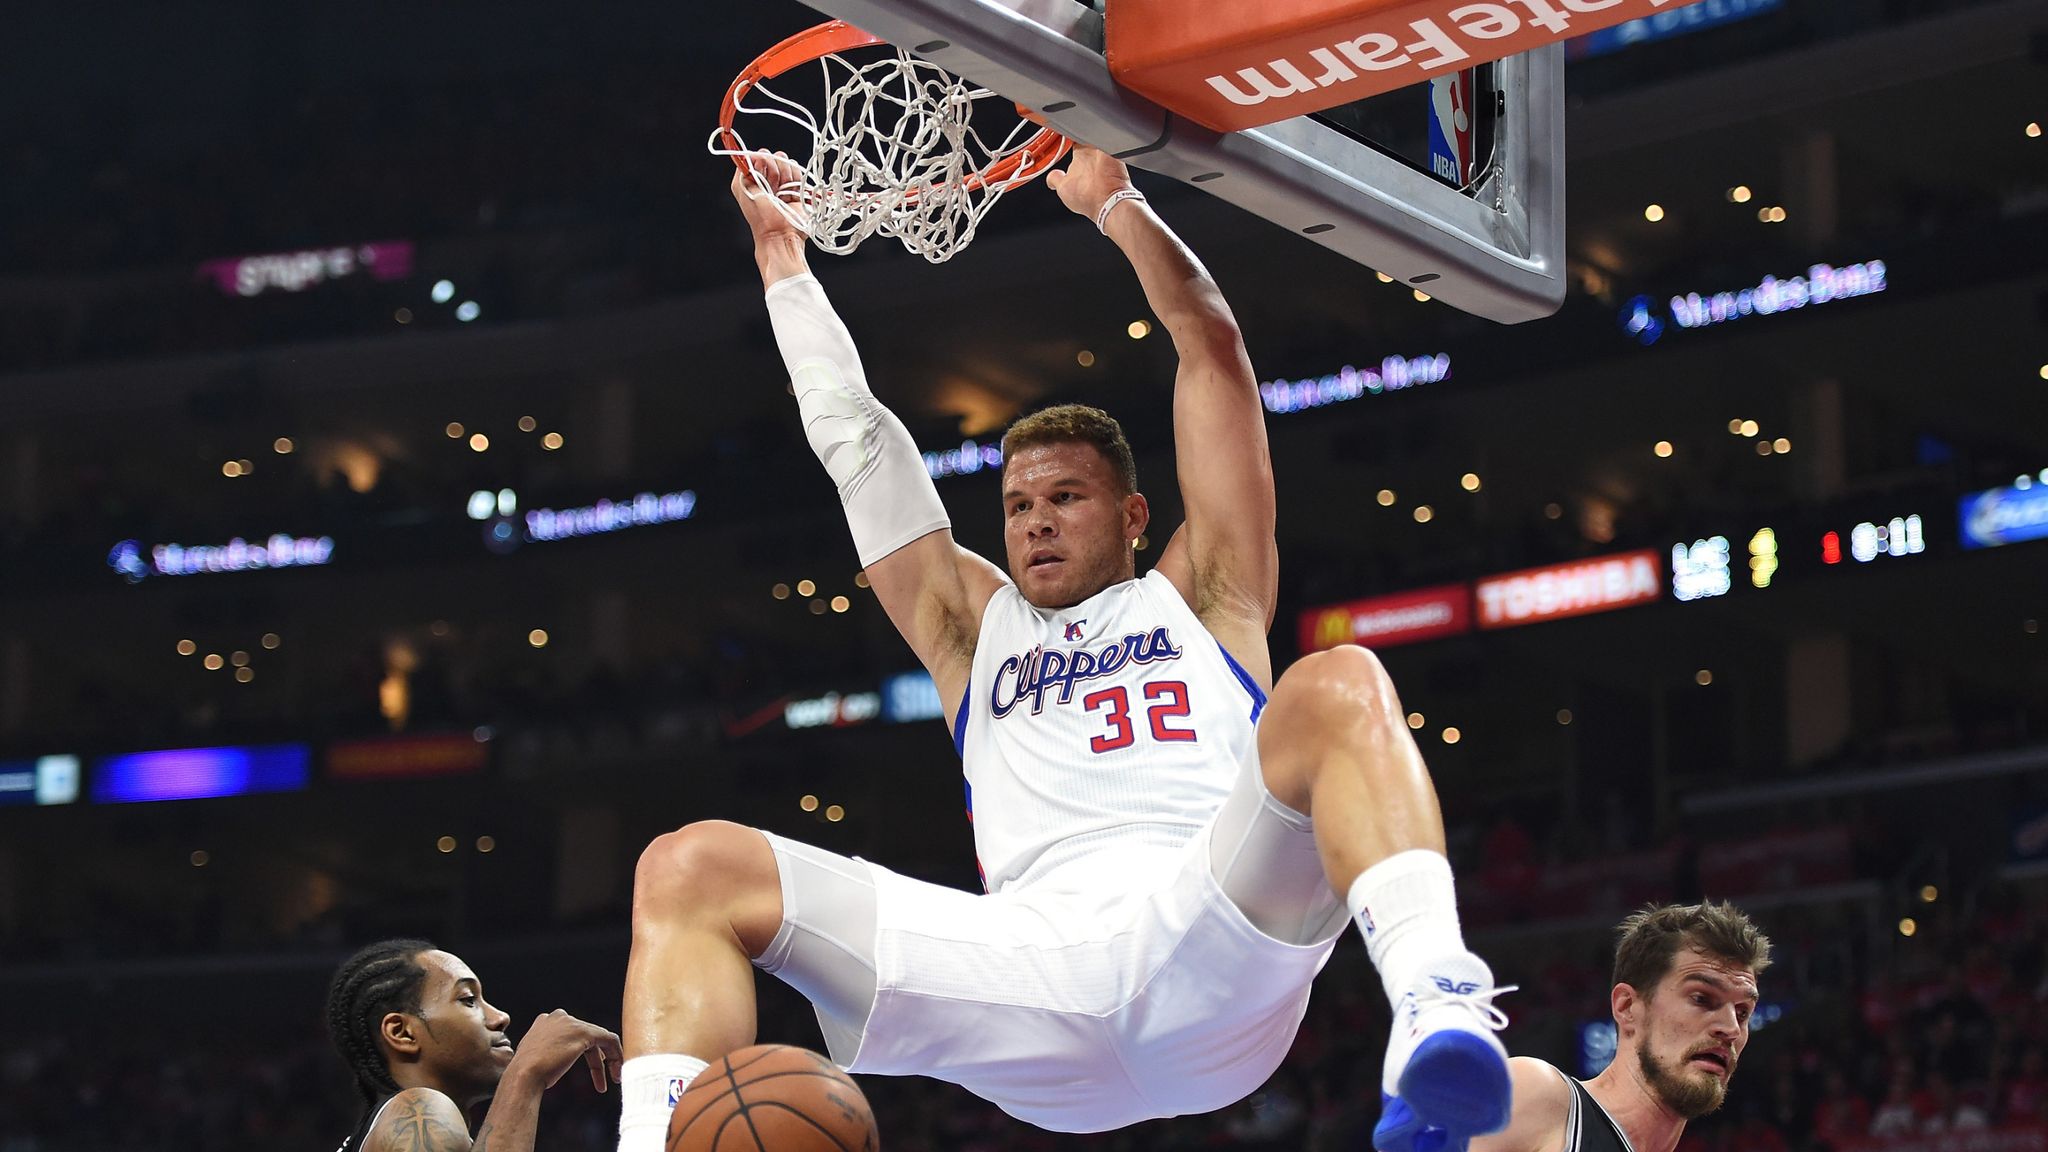 Blake Griffin: A modern NBA story of adapting your game to survive